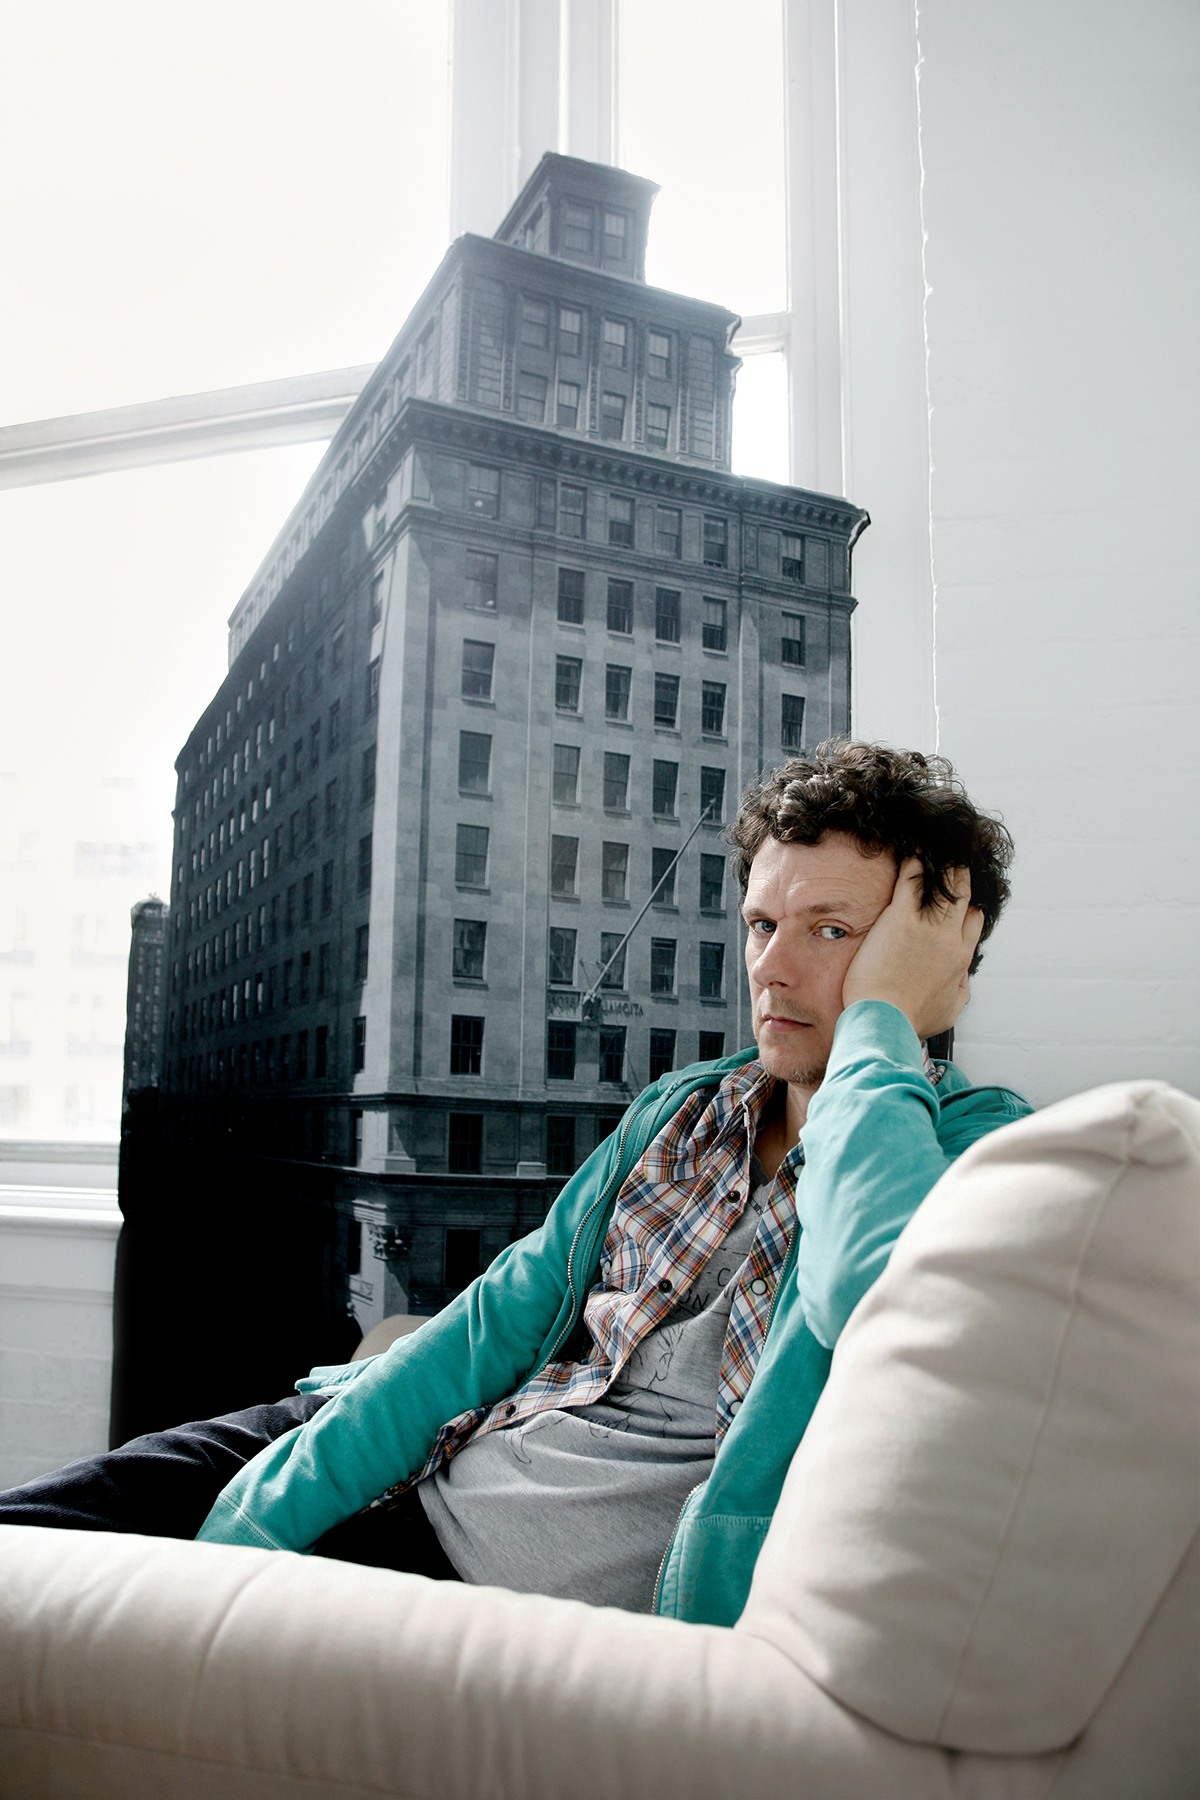 Michel Gondry director, screenwriter, and producer 